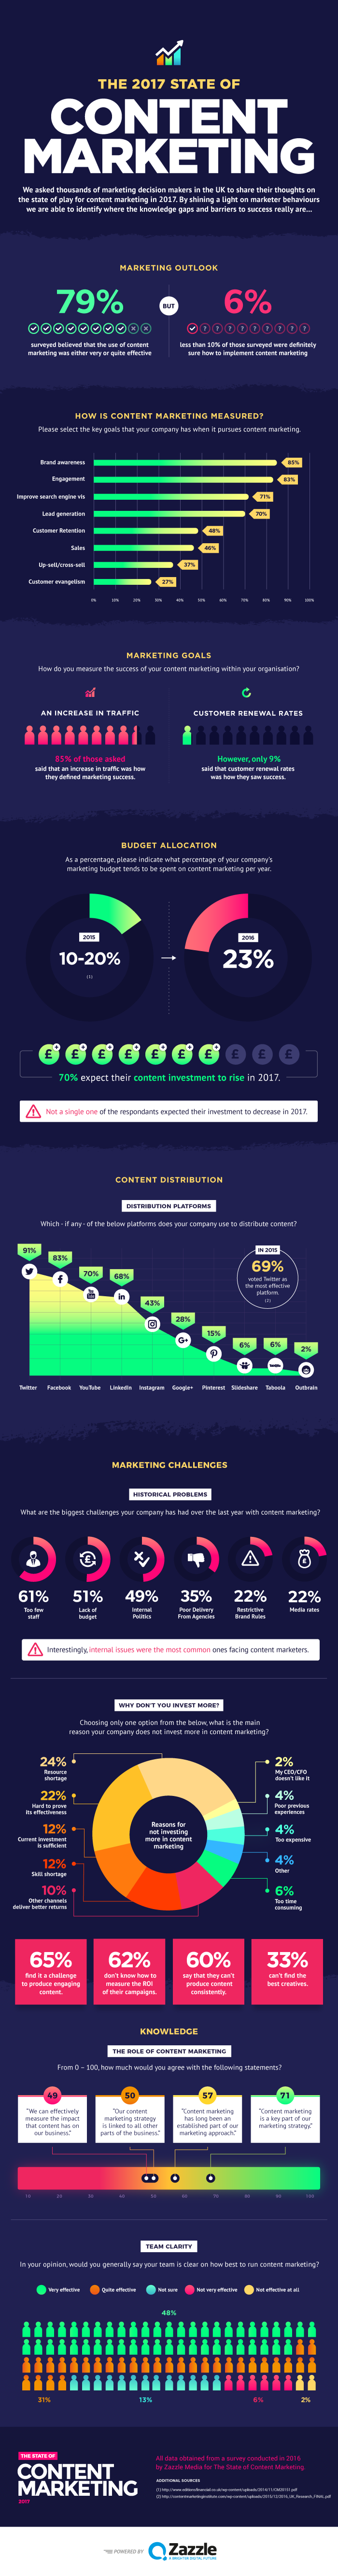 The 2017 State of Content Marketing [Infographic]